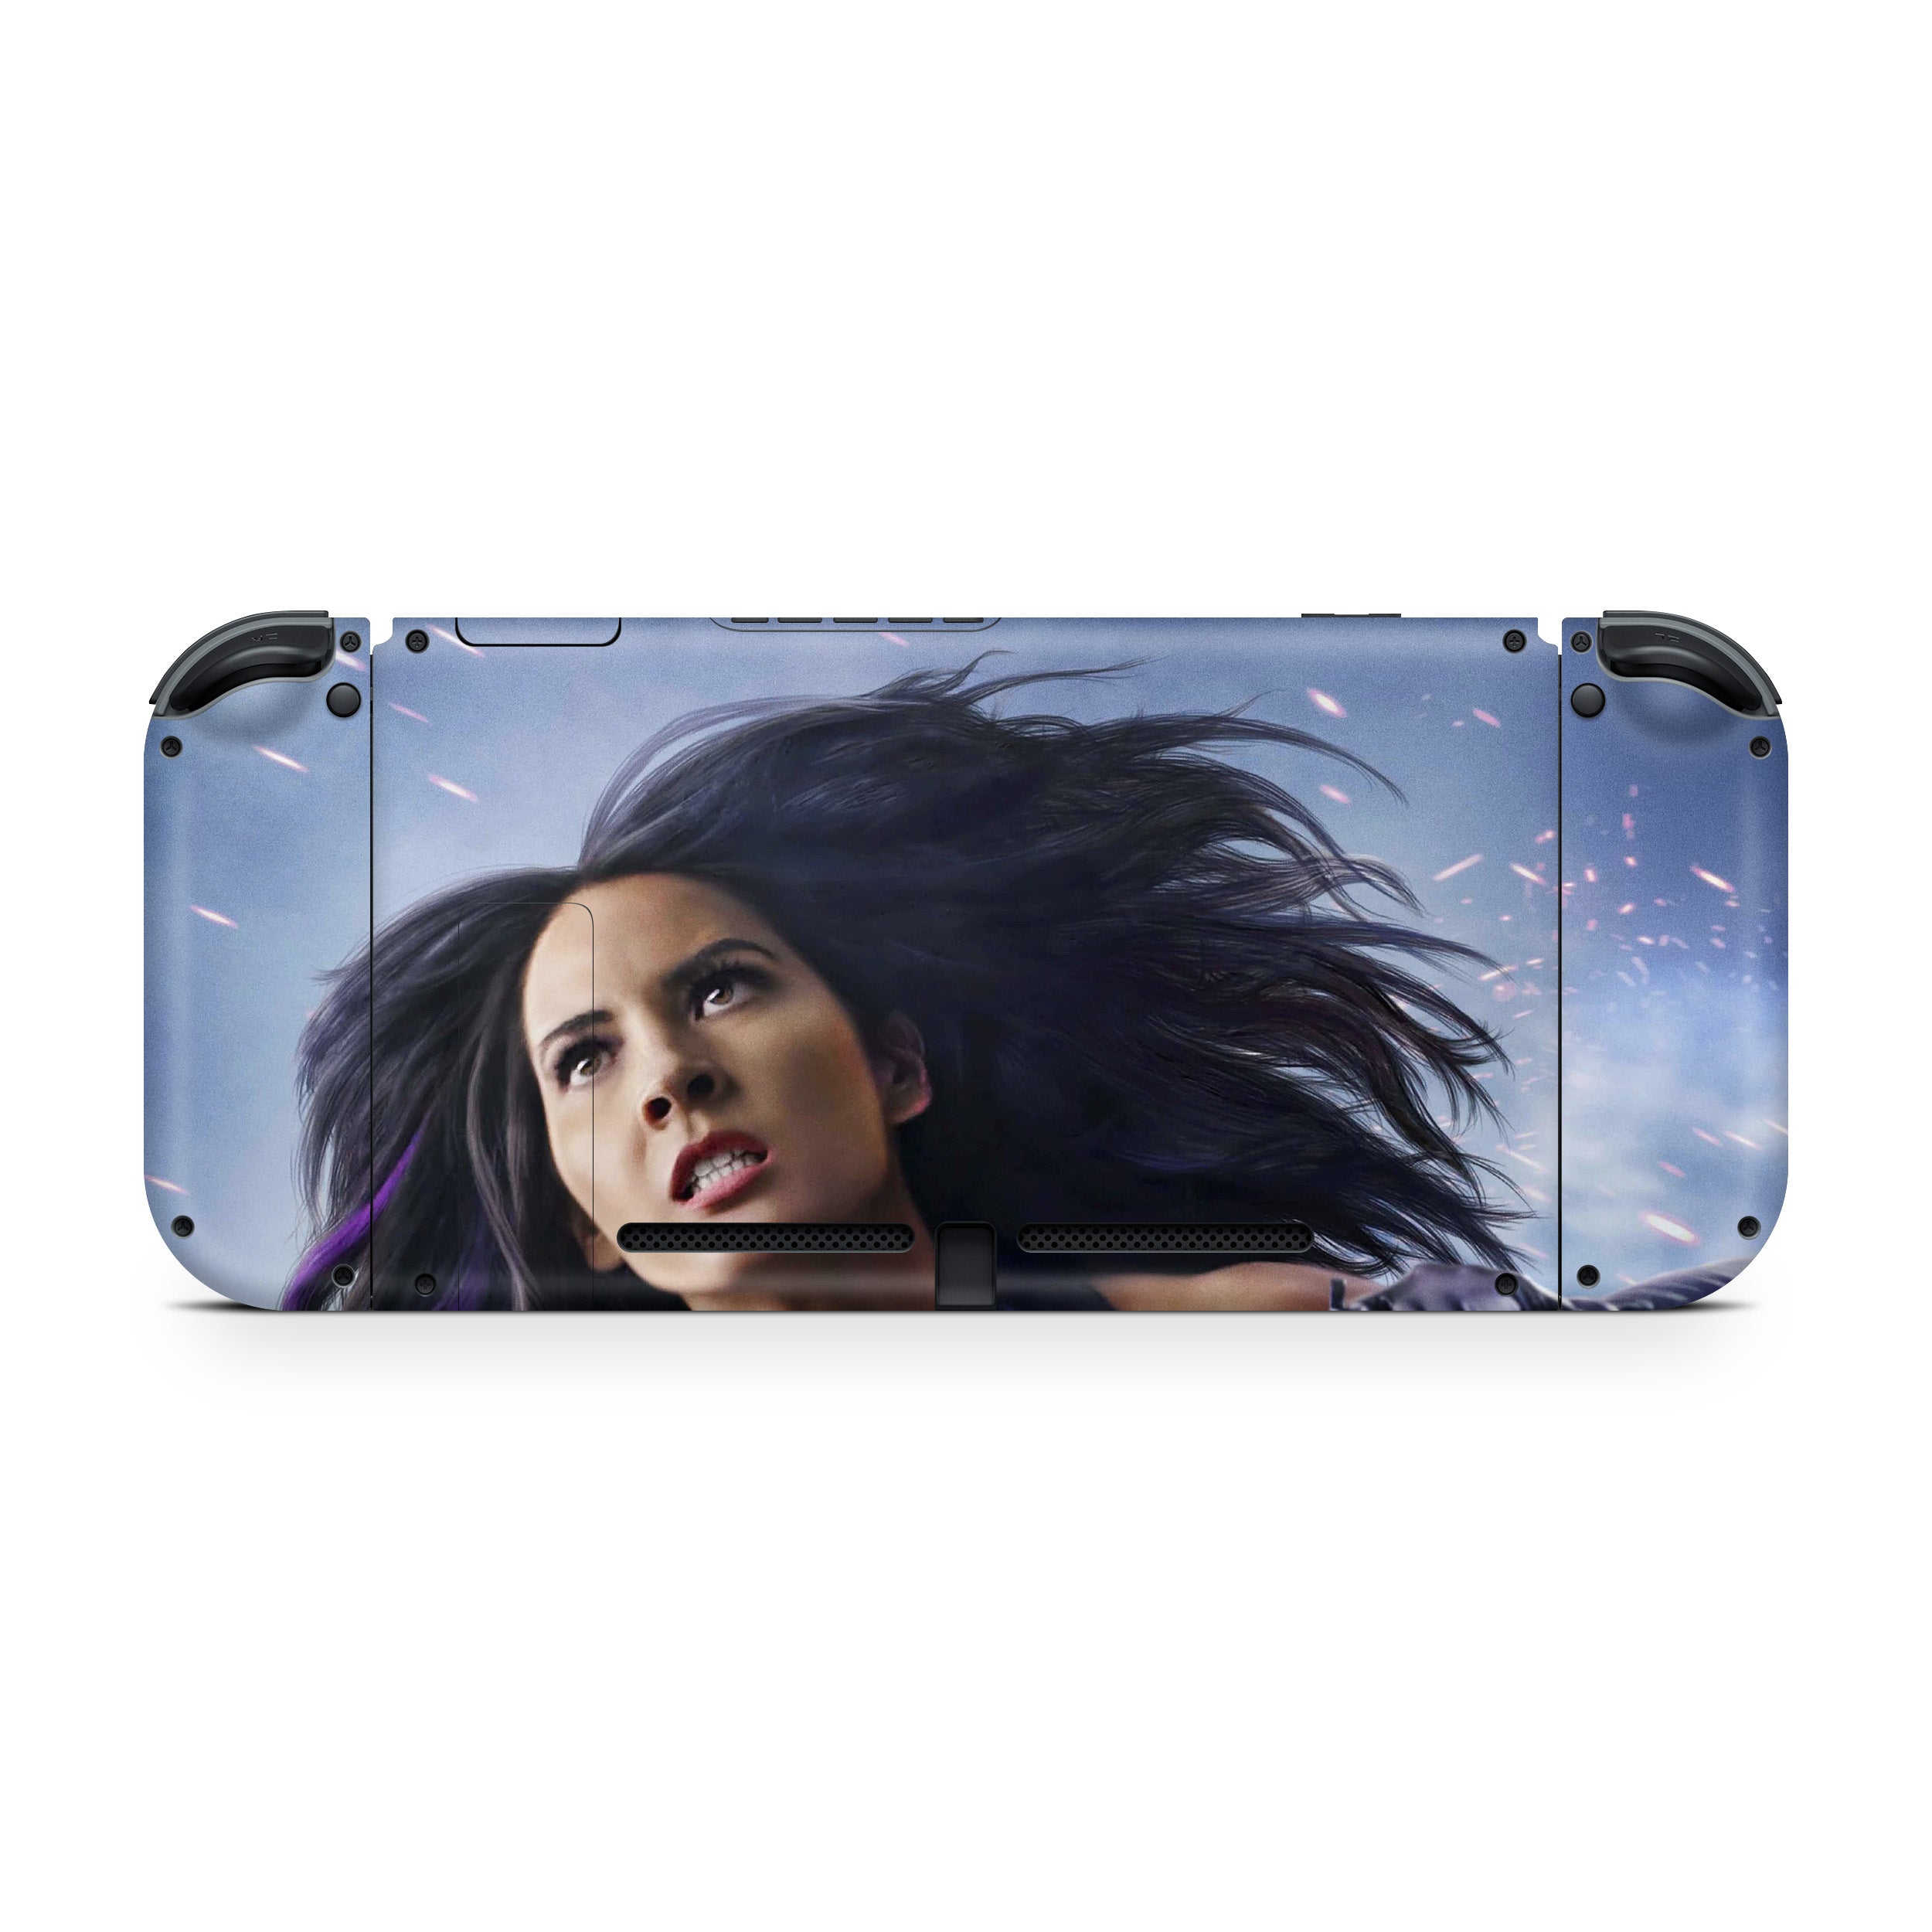 A video game skin featuring a Marvel X Men Psylocke design for the Nintendo Switch.